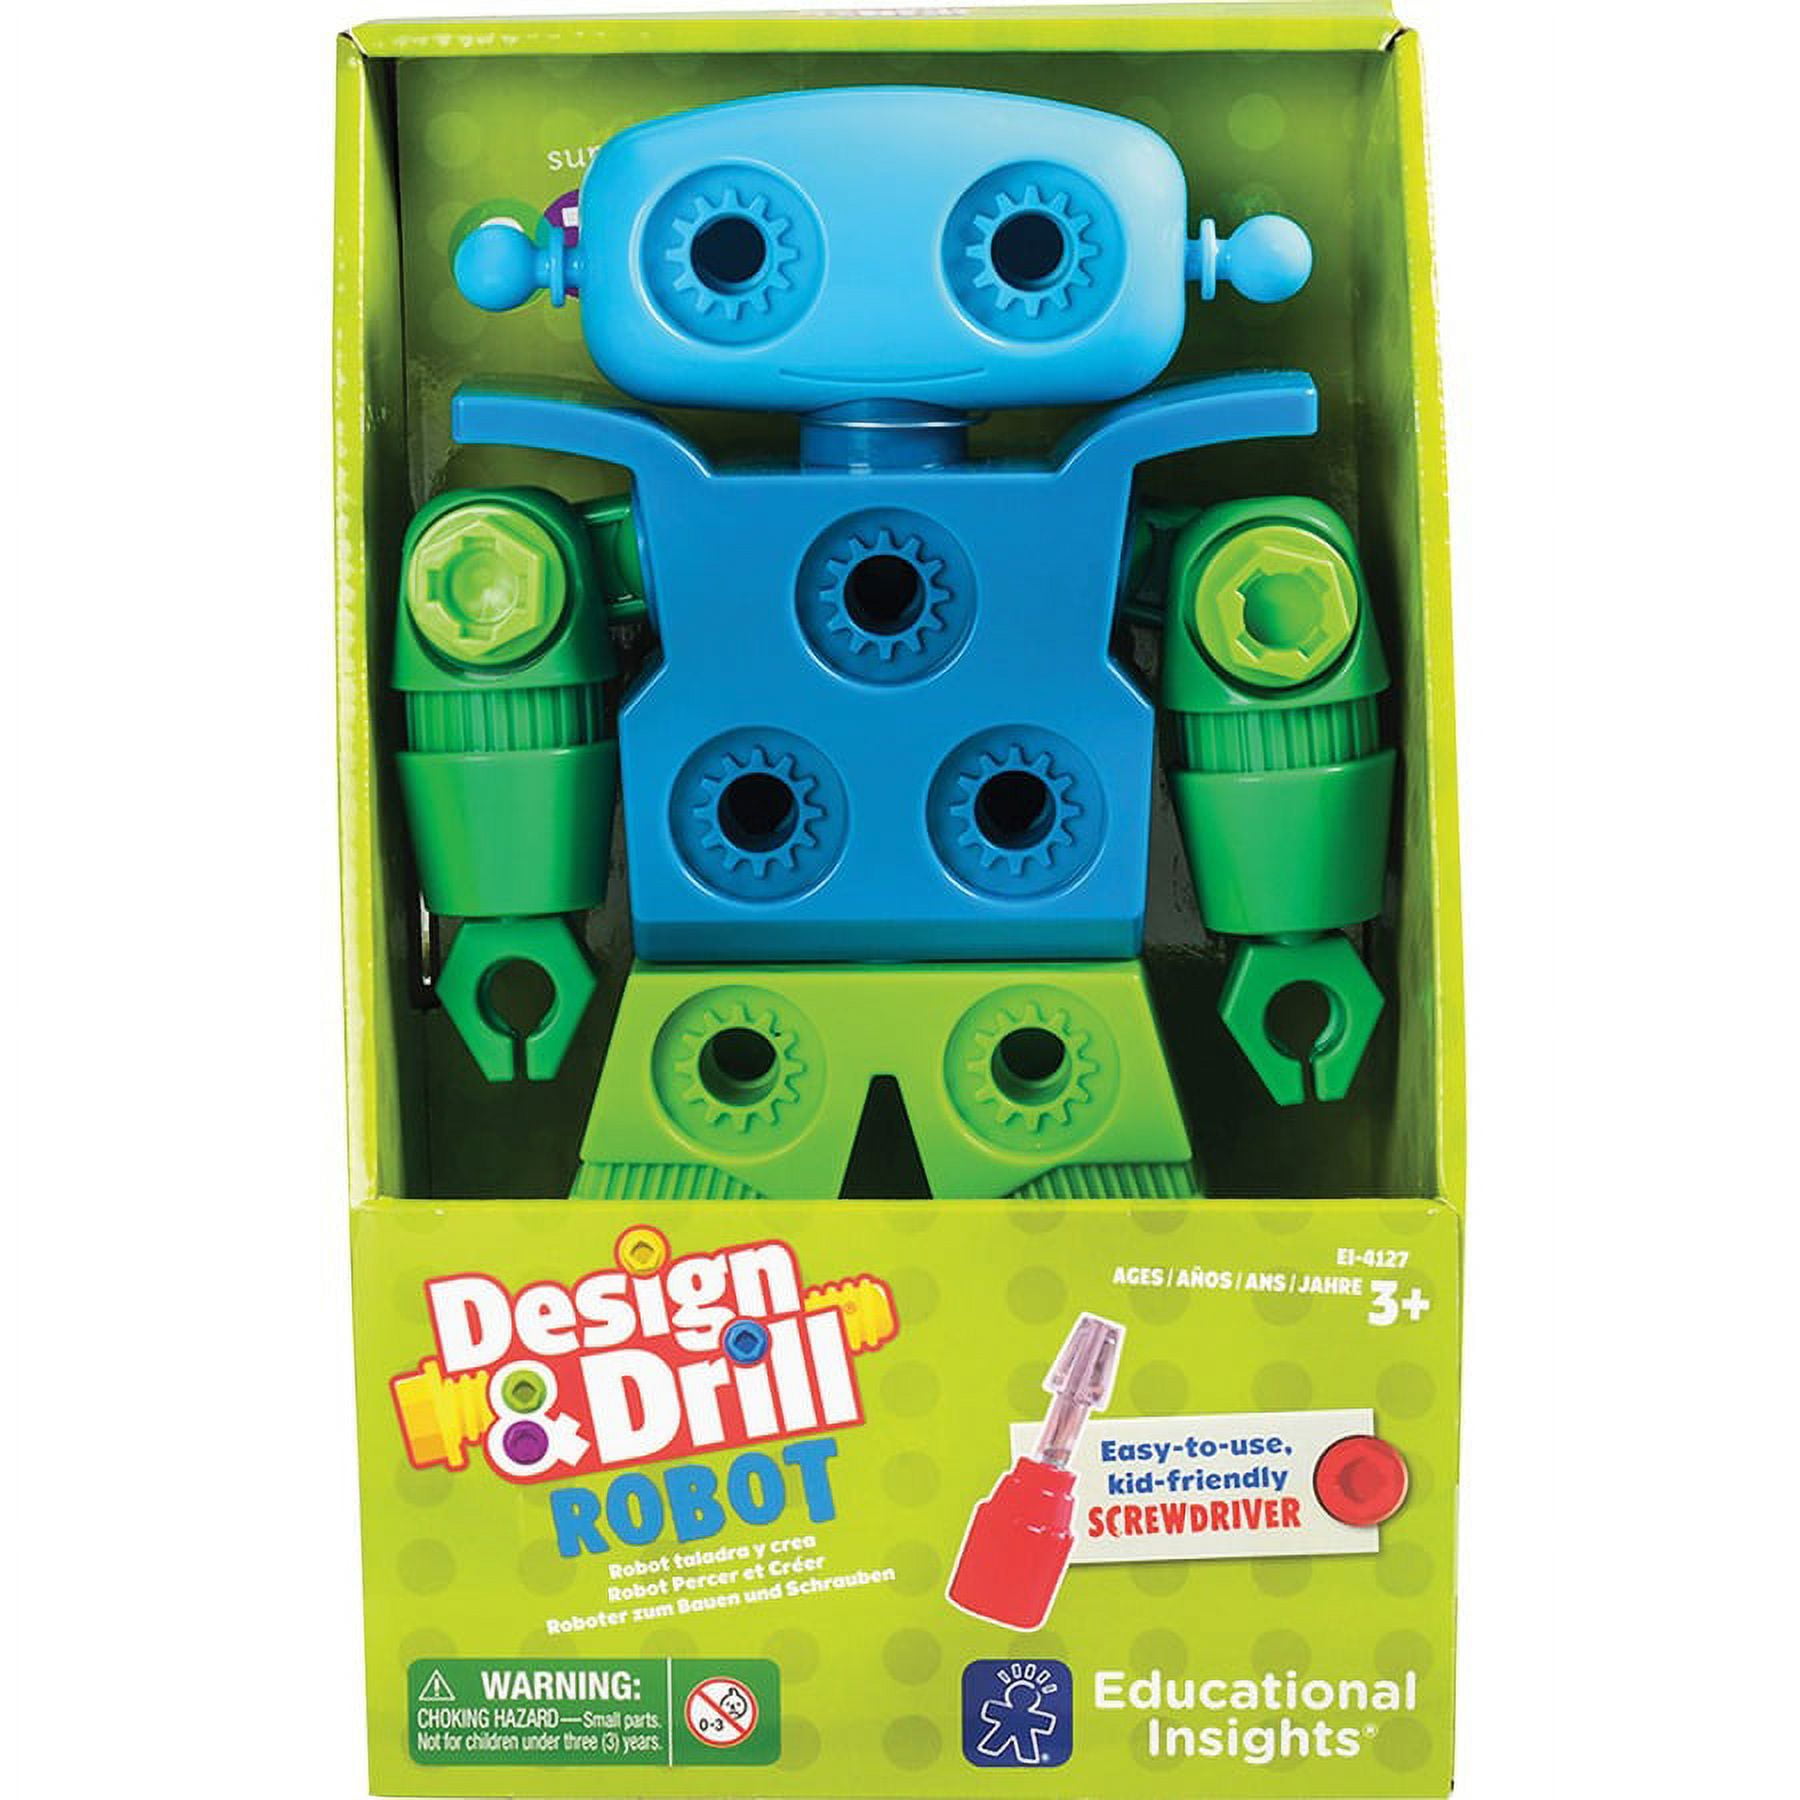 Educational Insights Design & Drill Robot Play Set - Theme/Subject